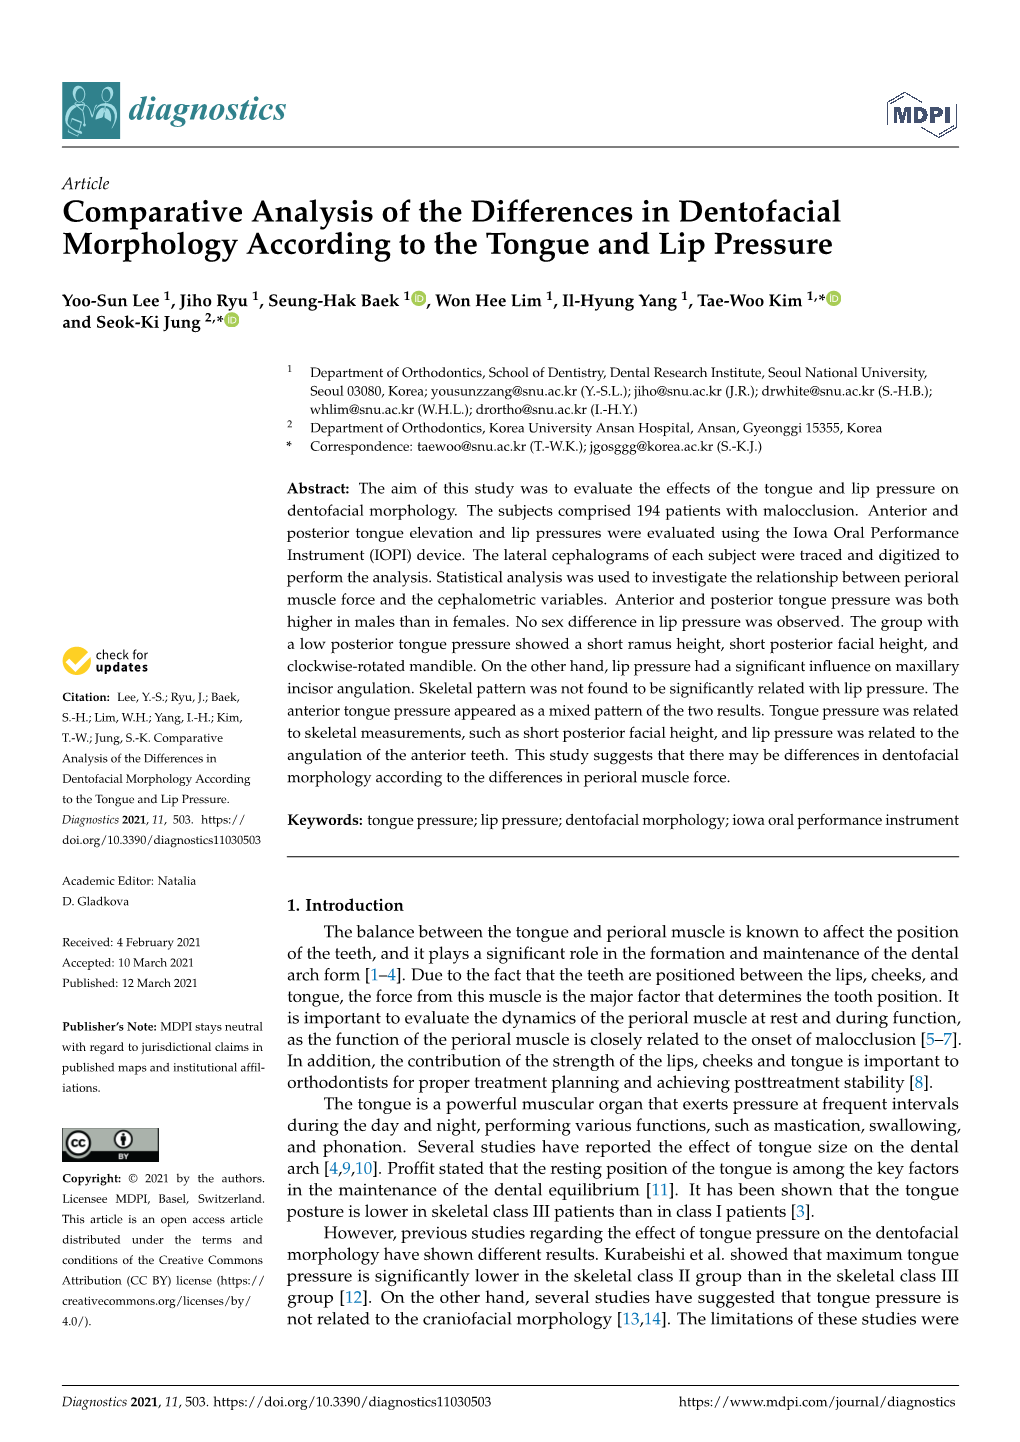 Comparative Analysis of the Differences in Dentofacial Morphology According to the Tongue and Lip Pressure